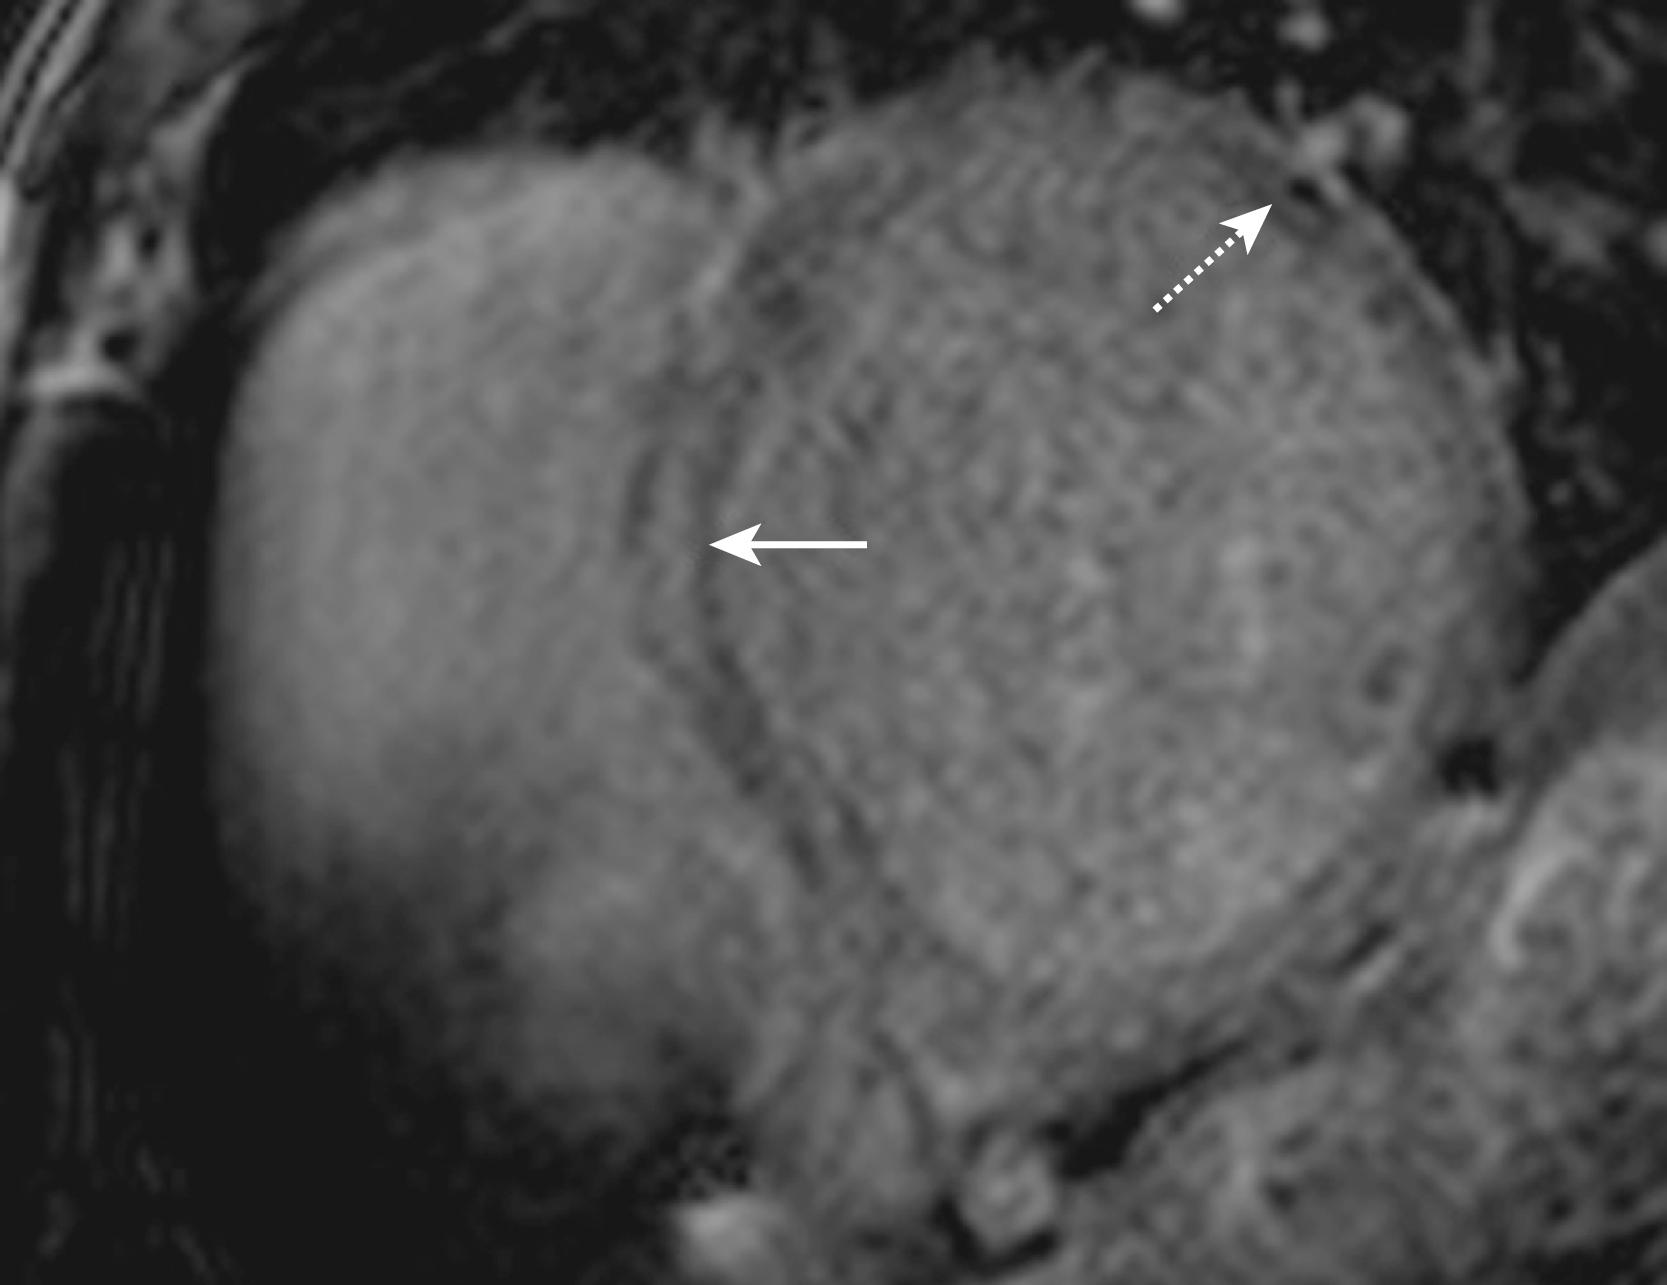 Fig. 65.2, Short-axis image focusing on the right and left ventricles demonstrating atypical and diffuse pattern of scar in nonischemic cardiomyopathy. In this three-dimensional navigator-gated image, the contrast-to-noise ratio is sacrificed to provide greater spatial resolution. Striae of midwall late gadolinium enhancement are readily visualized in the septum ( solid arrow ) and lateral wall ( dashed arrow ).